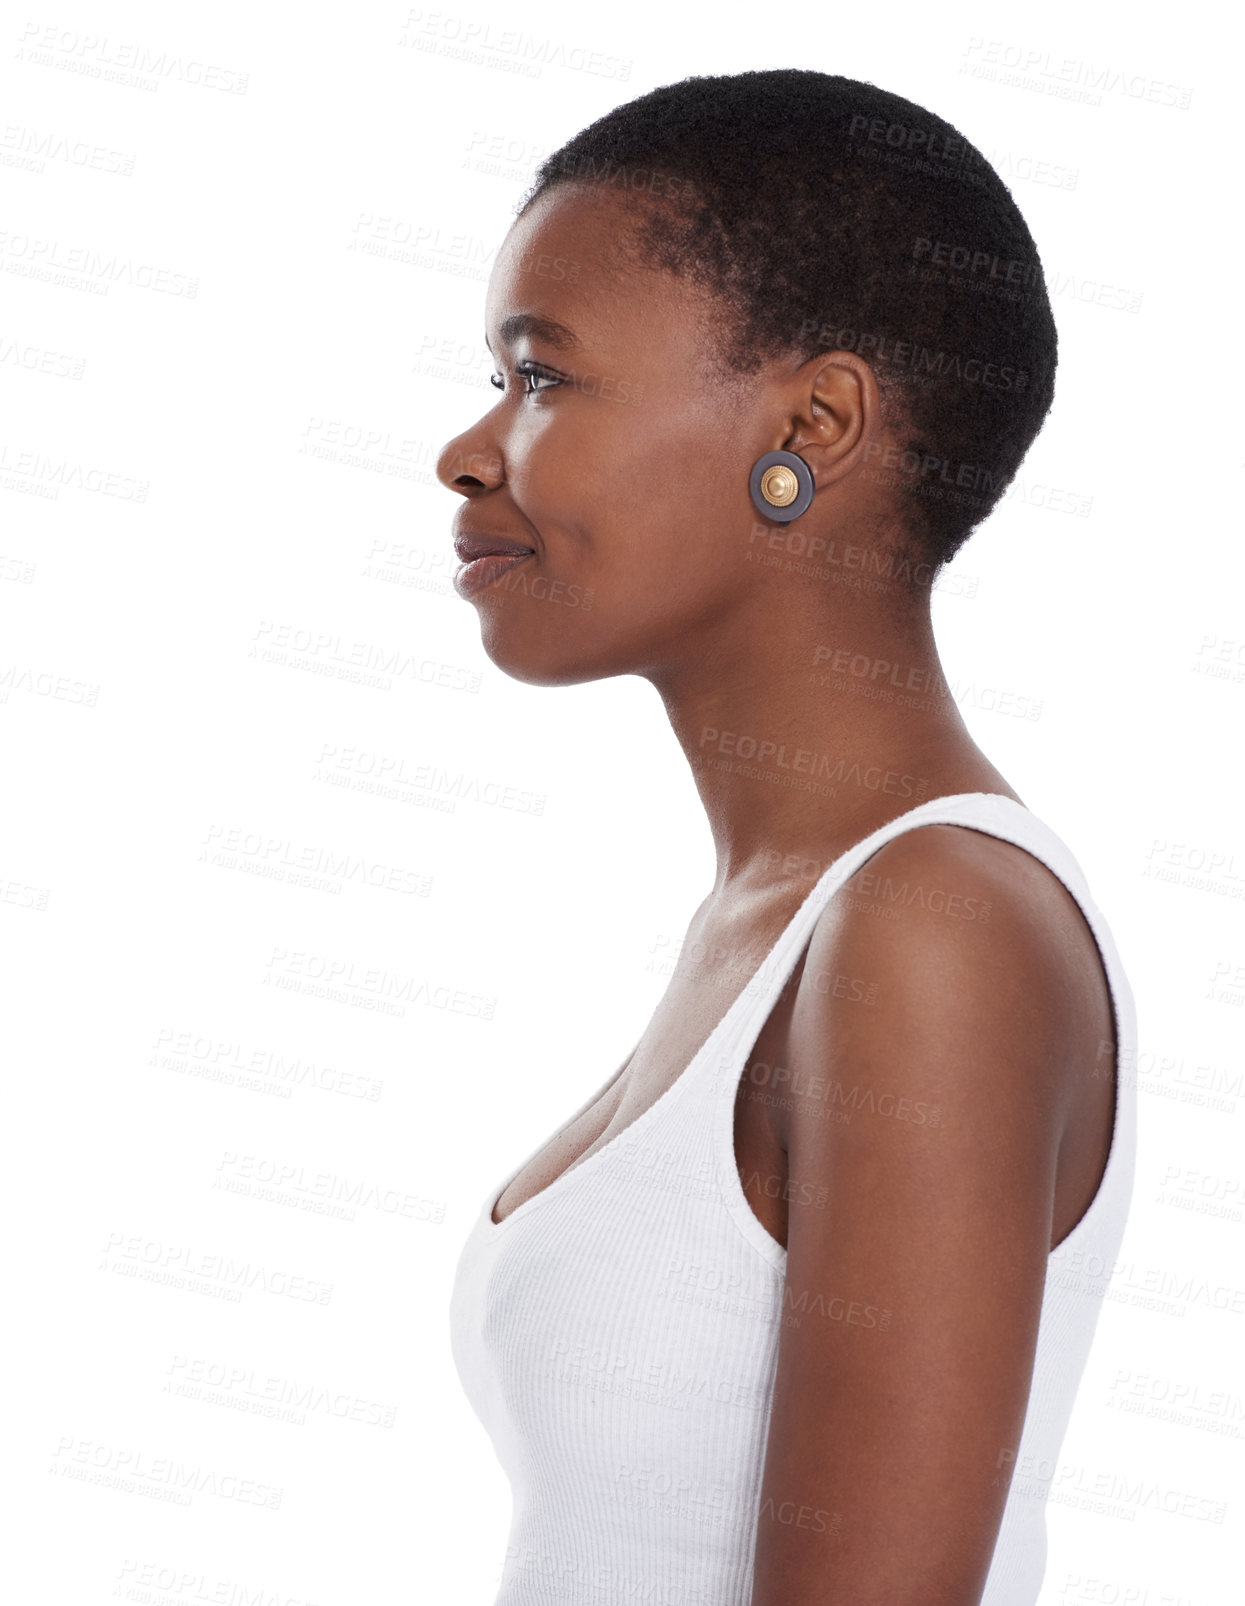 Buy stock photo Profile shot of a smiling young woman standing against a white background